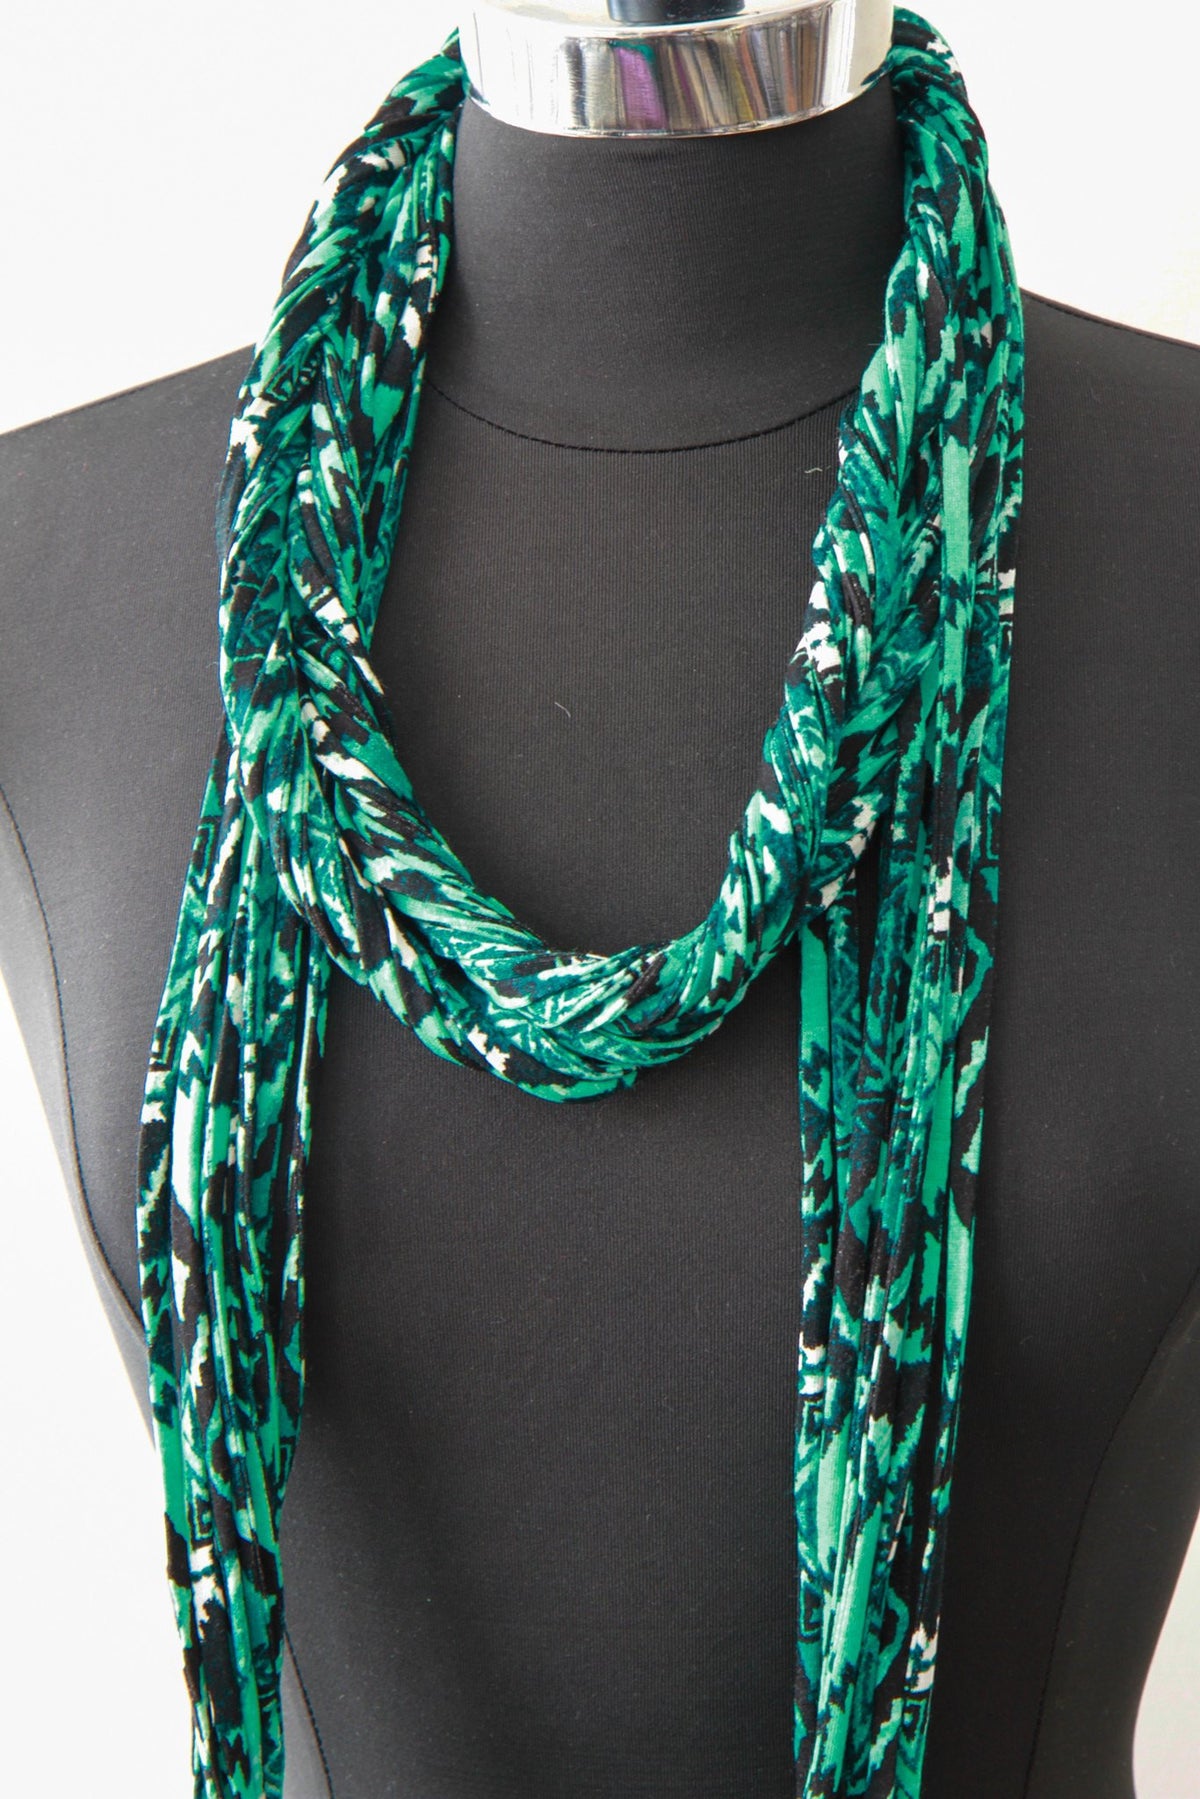 Teal Scarf or Jewelry for Women. Made in Canada